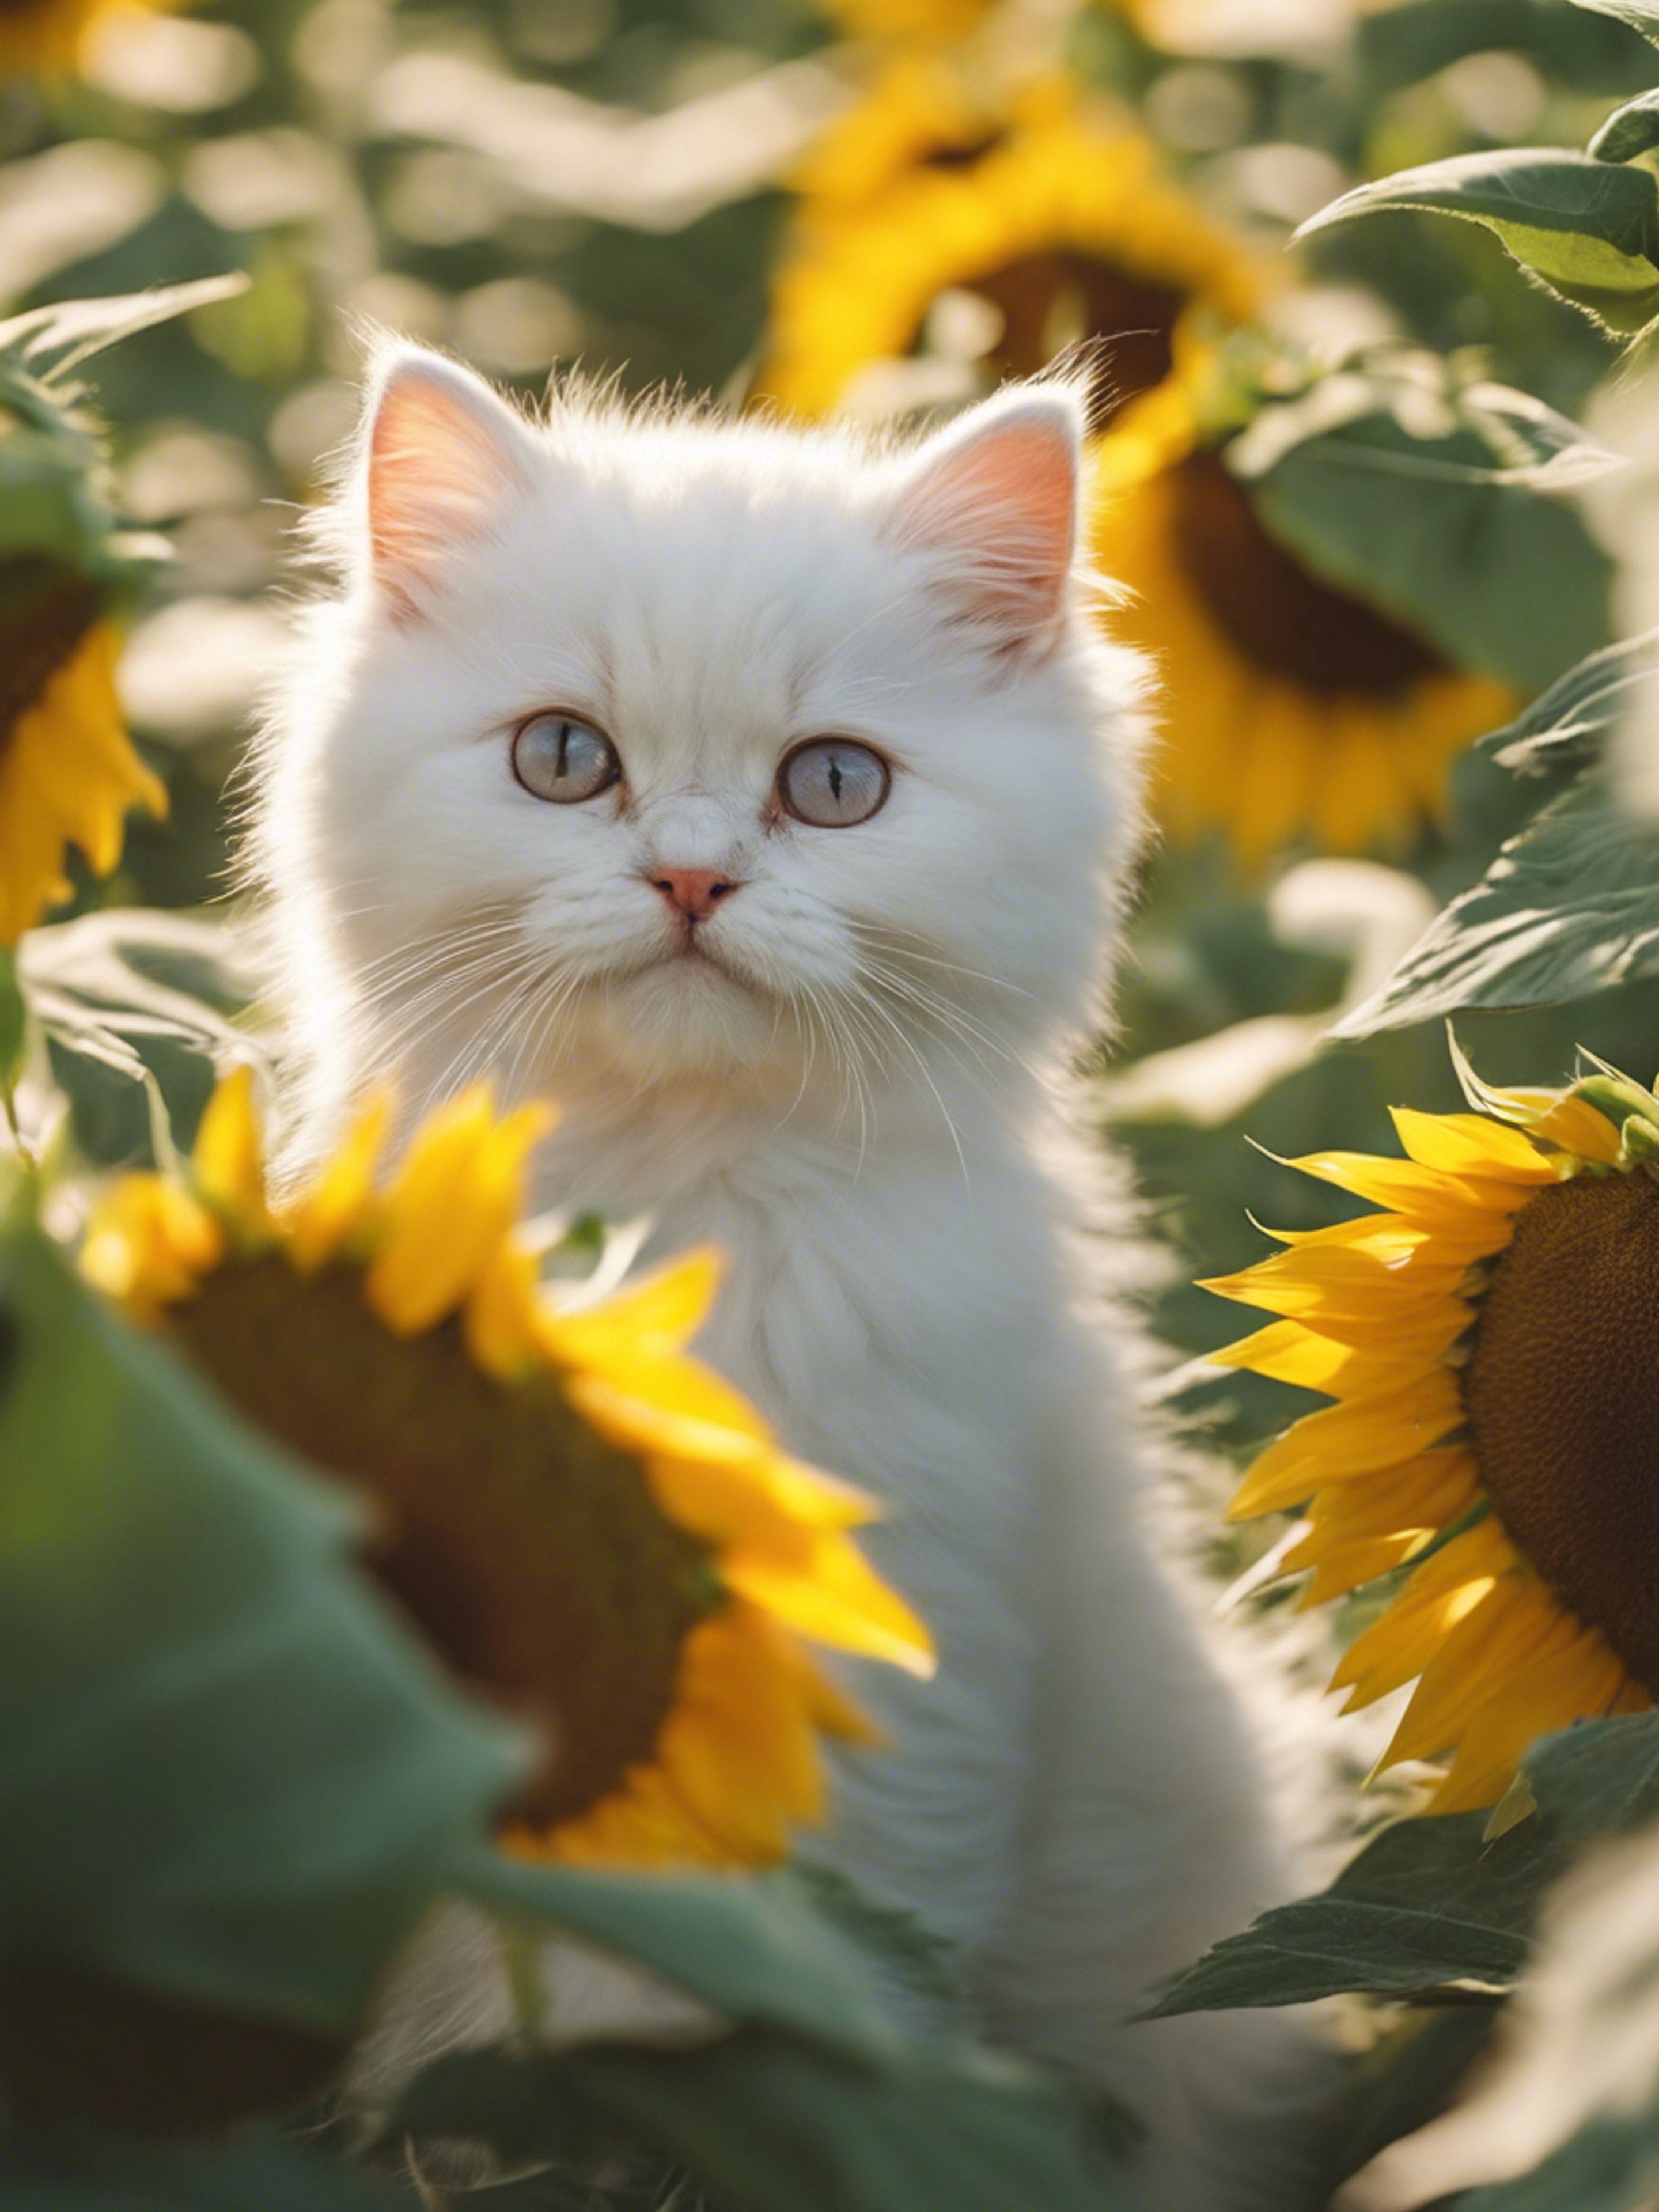 A snow-white Persian kitten playing peek-a-boo among a field of sunflowers on a bright, sunny day. Hình nền[783f0584fefb42ff9955]